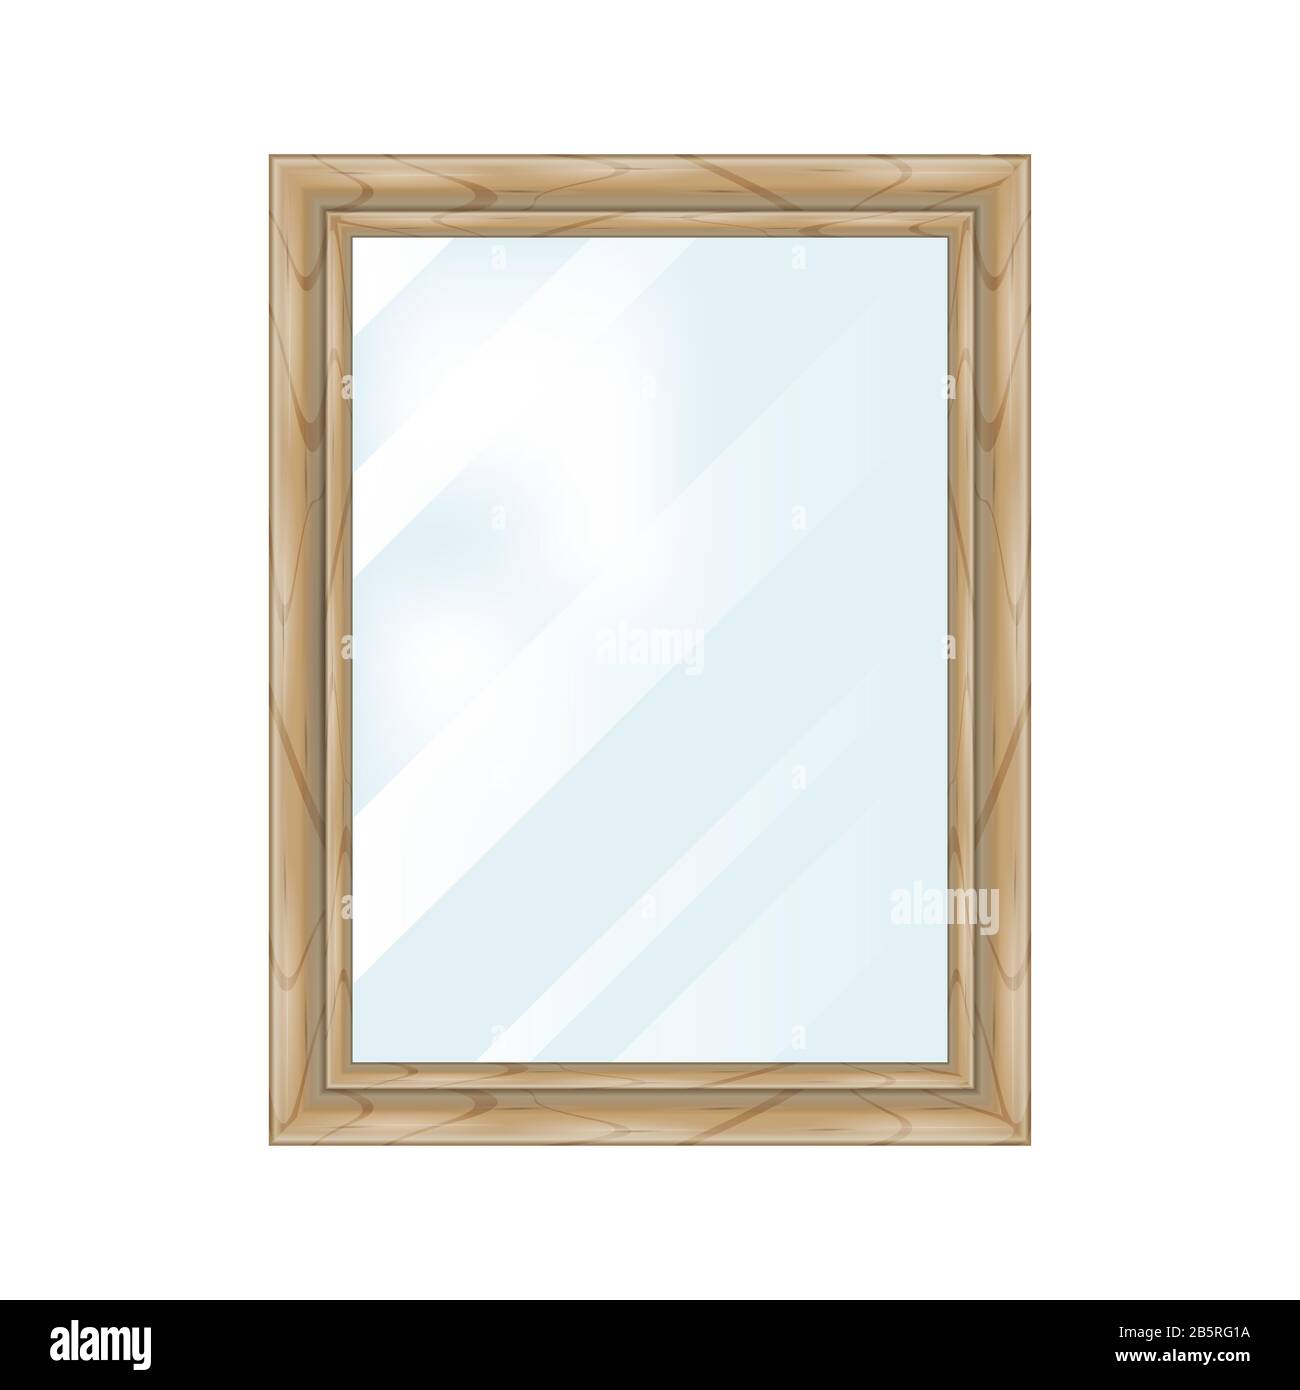 Single wooden window frame with glass isolated on white. Realistic illustration. Textured window frame, sun rays on the glass. Stock Photo